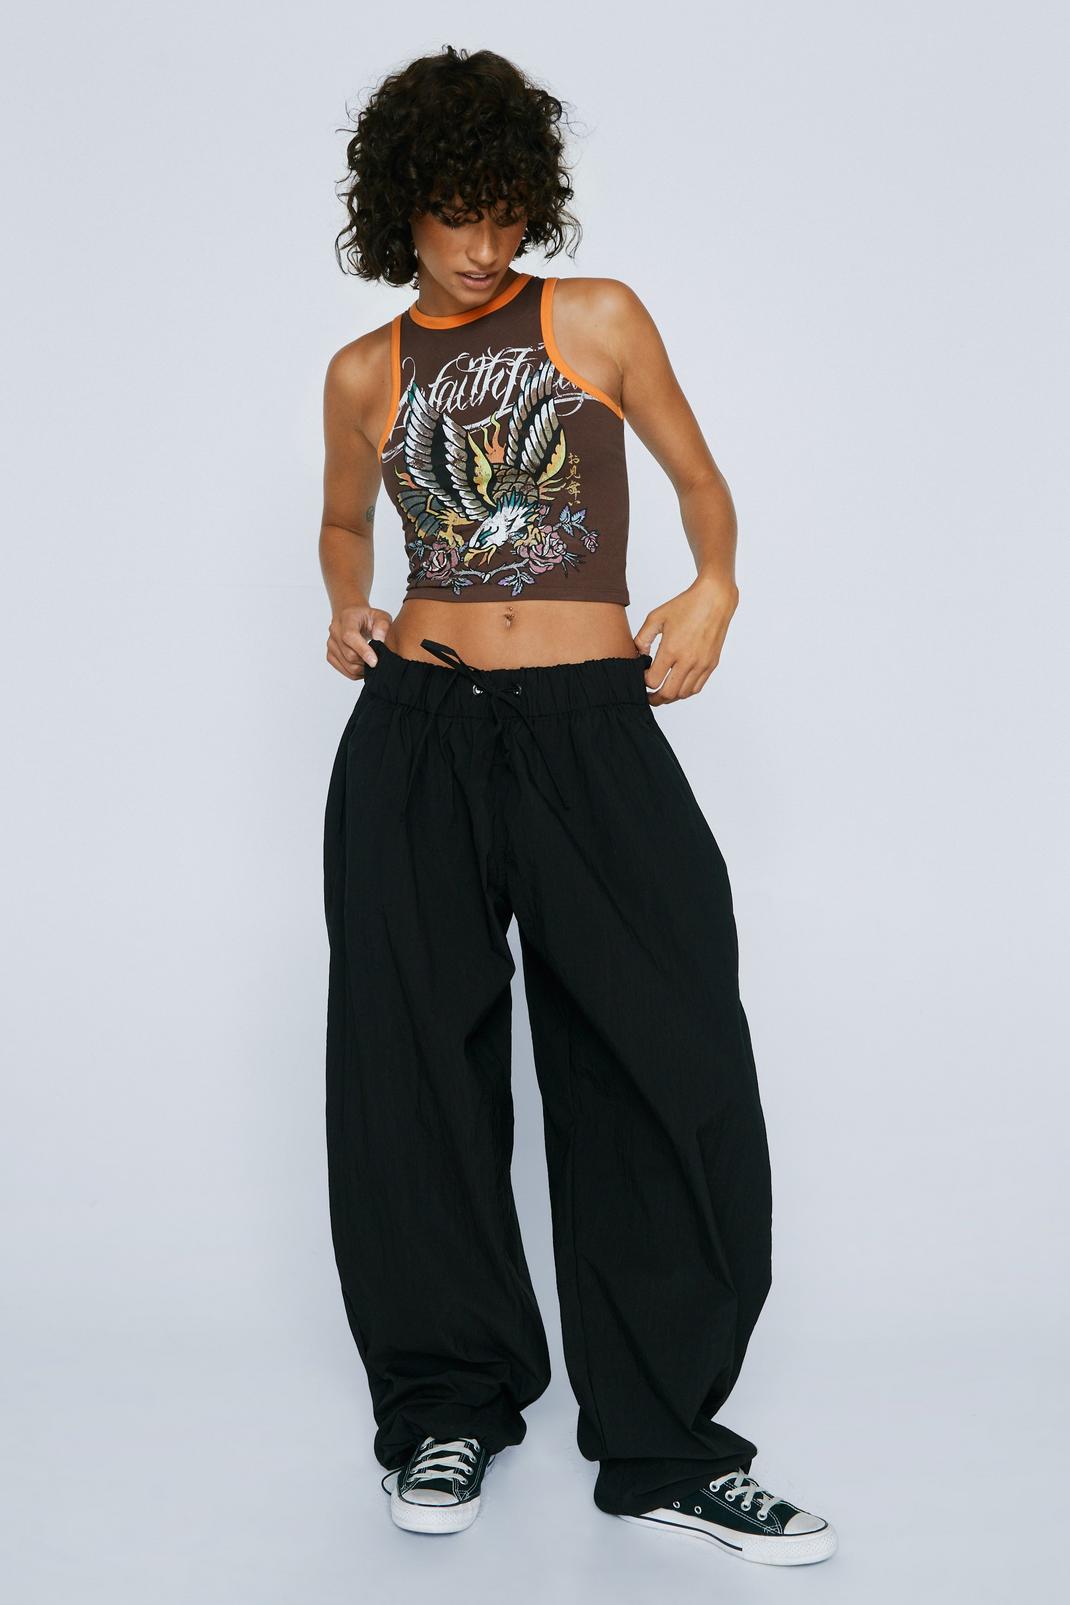 How to Style Parachute Pants